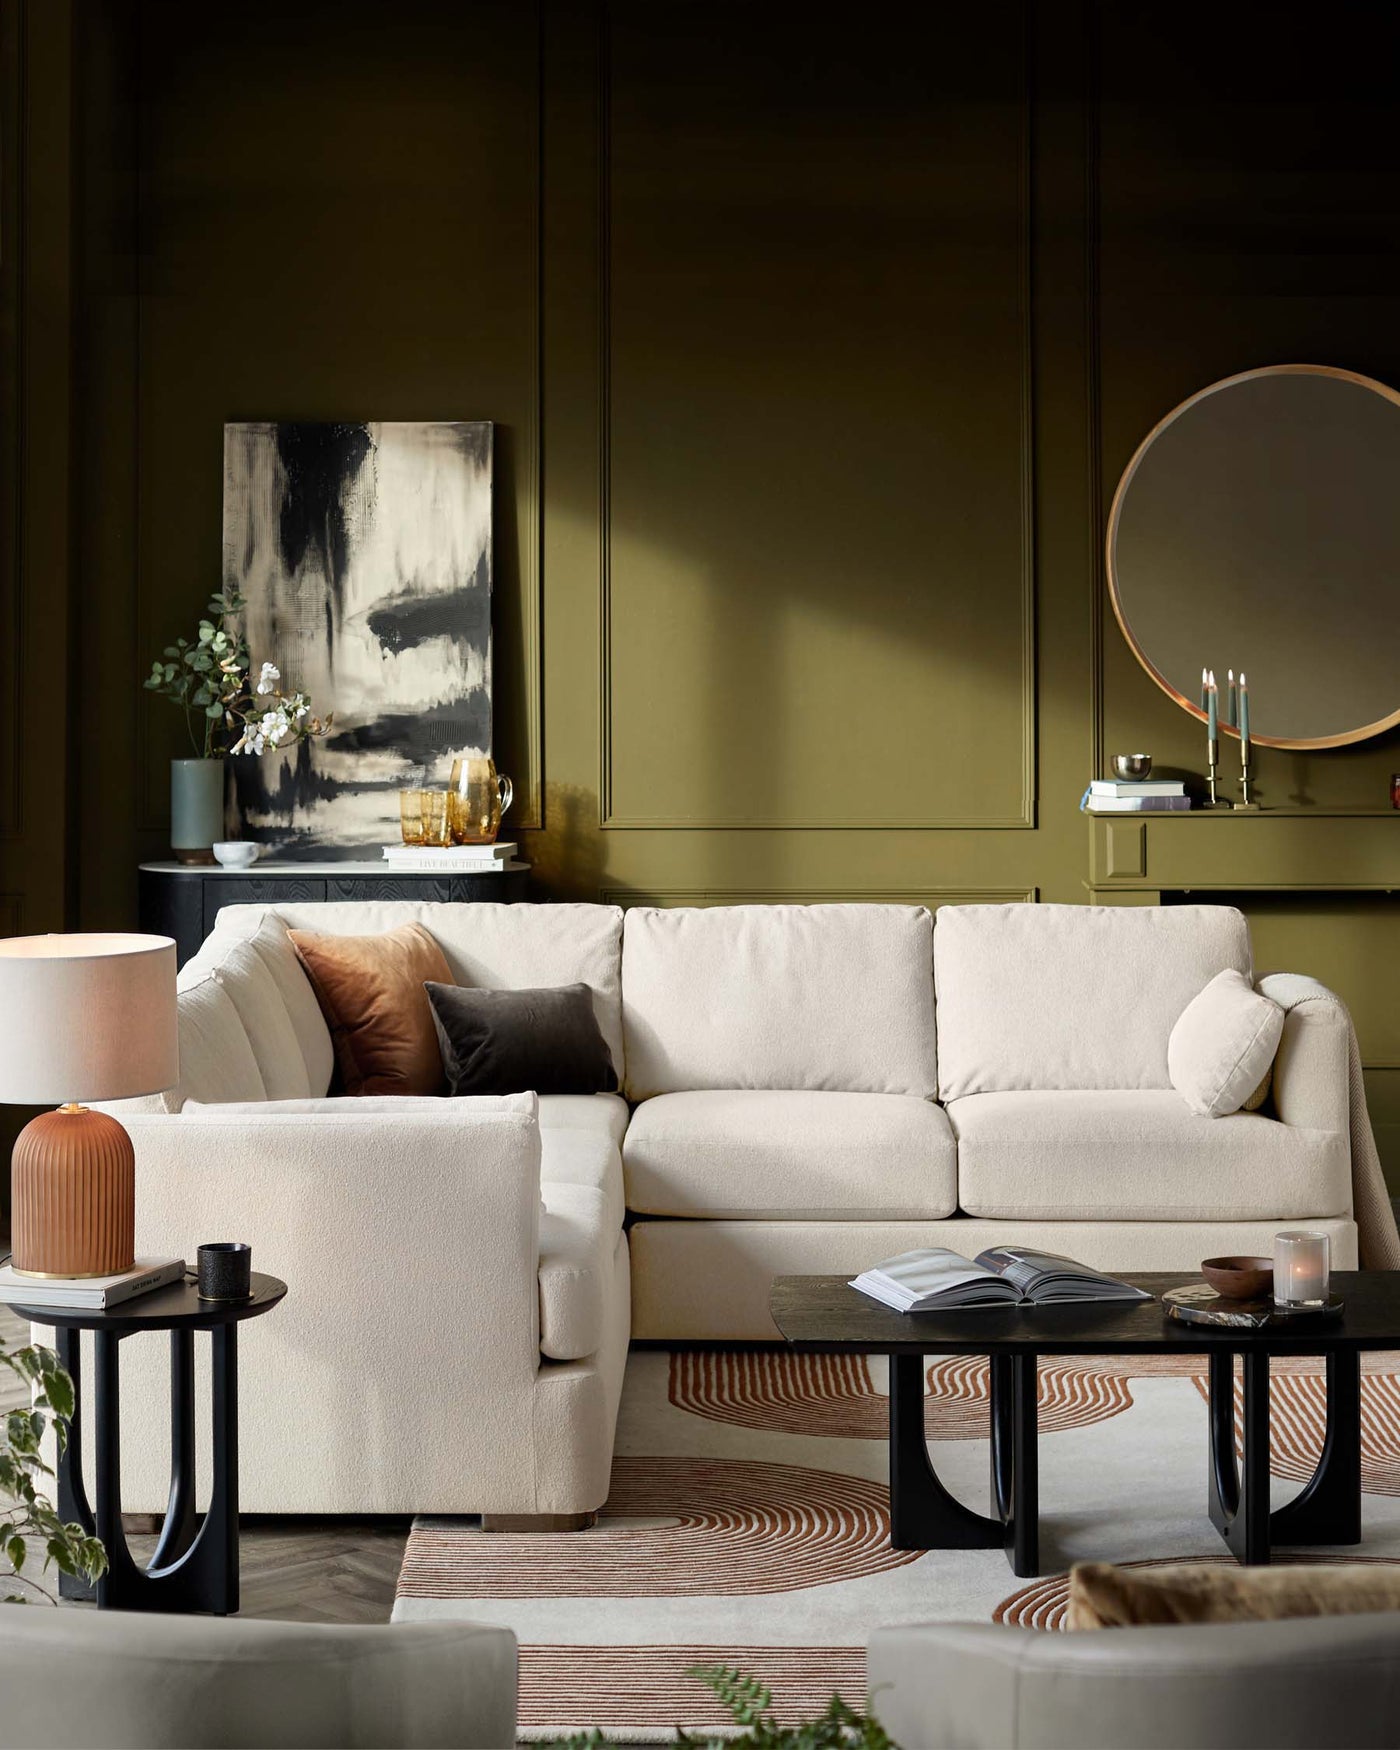 Modern L-shaped beige sectional sofa with plush cushions, paired with a round black side table and a rectangular black coffee table, set on a patterned rug in a sophisticated living room setting.